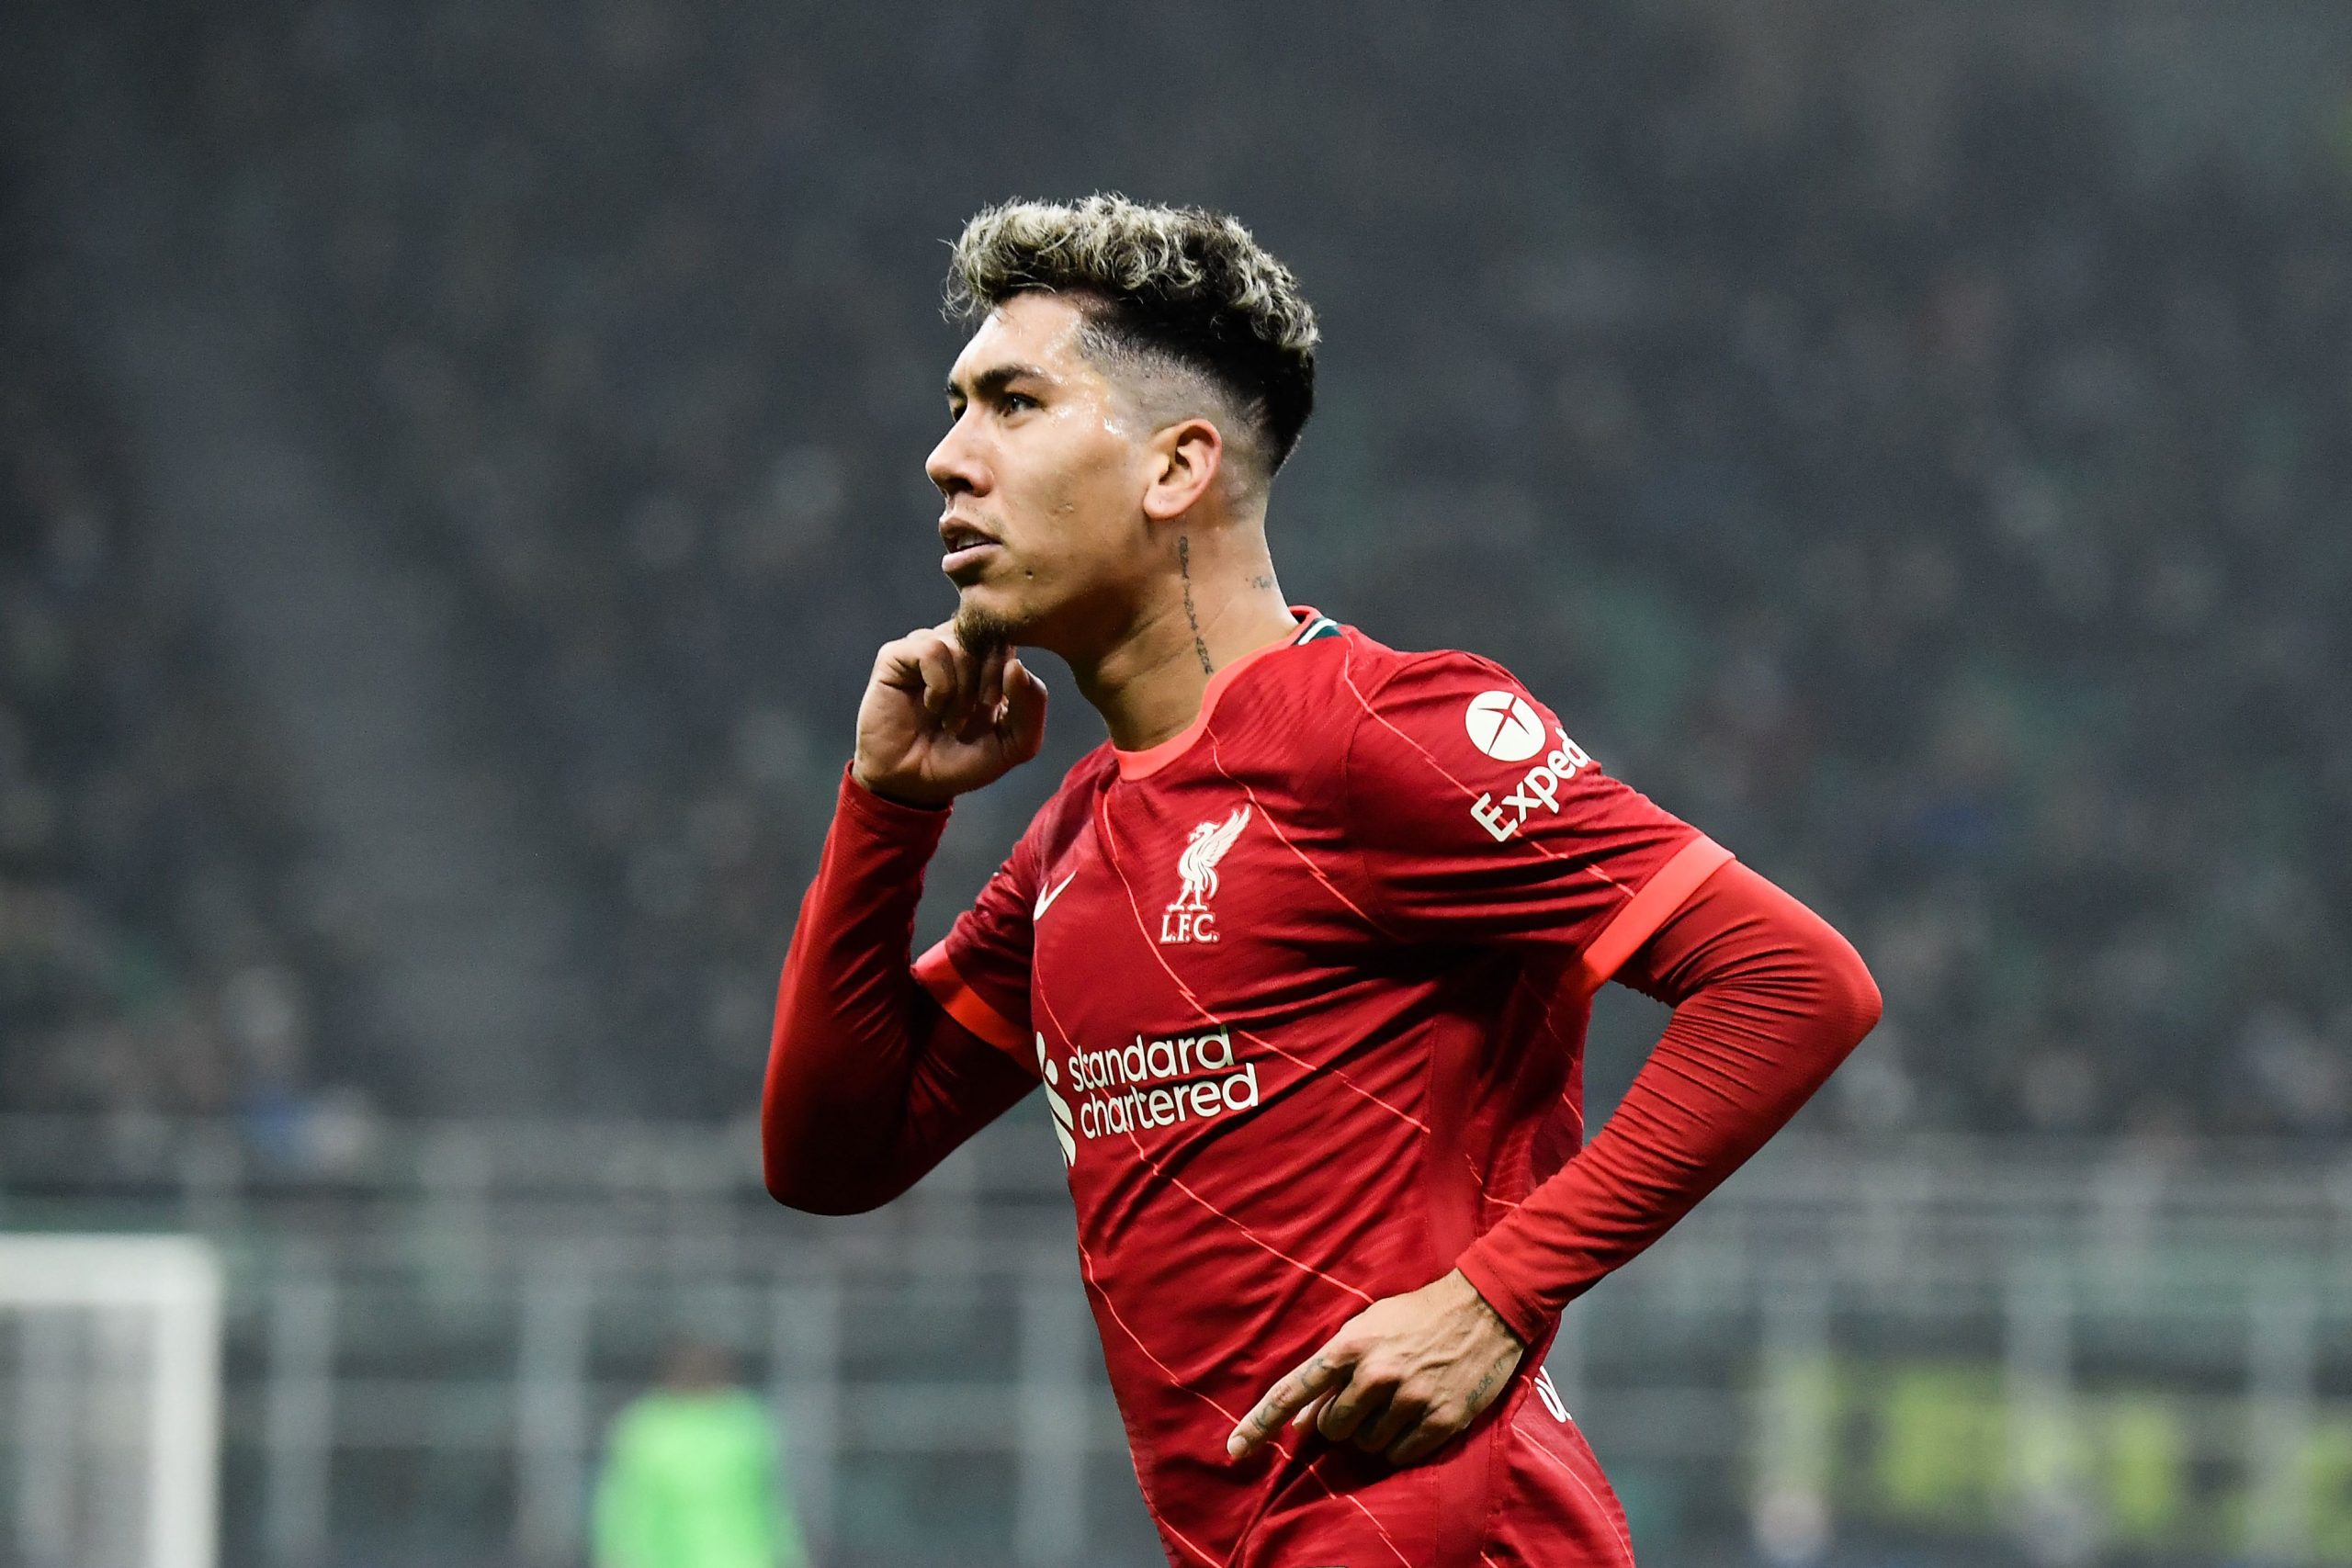 Roberto Firmino is out for Sunday's final against Chelsea.